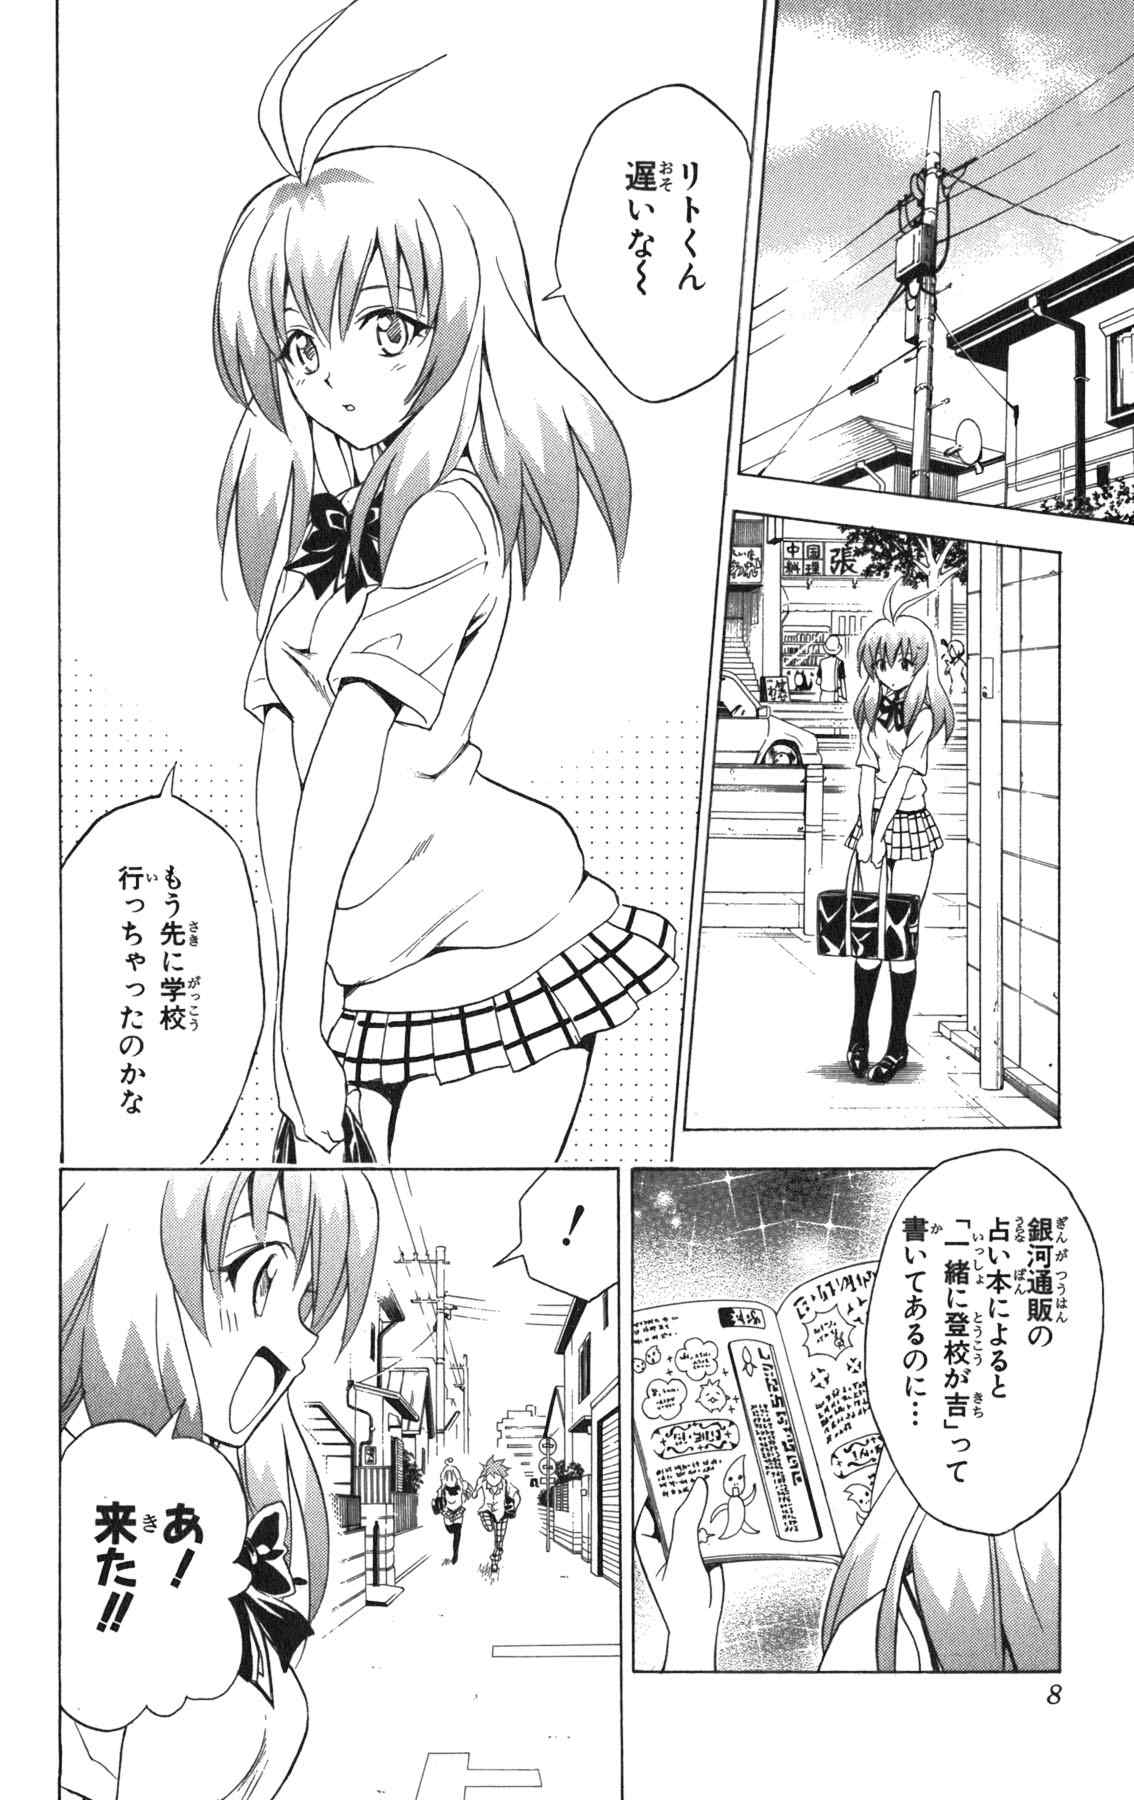 《To LOVEるとらぶる》漫画 To LOVE 09卷